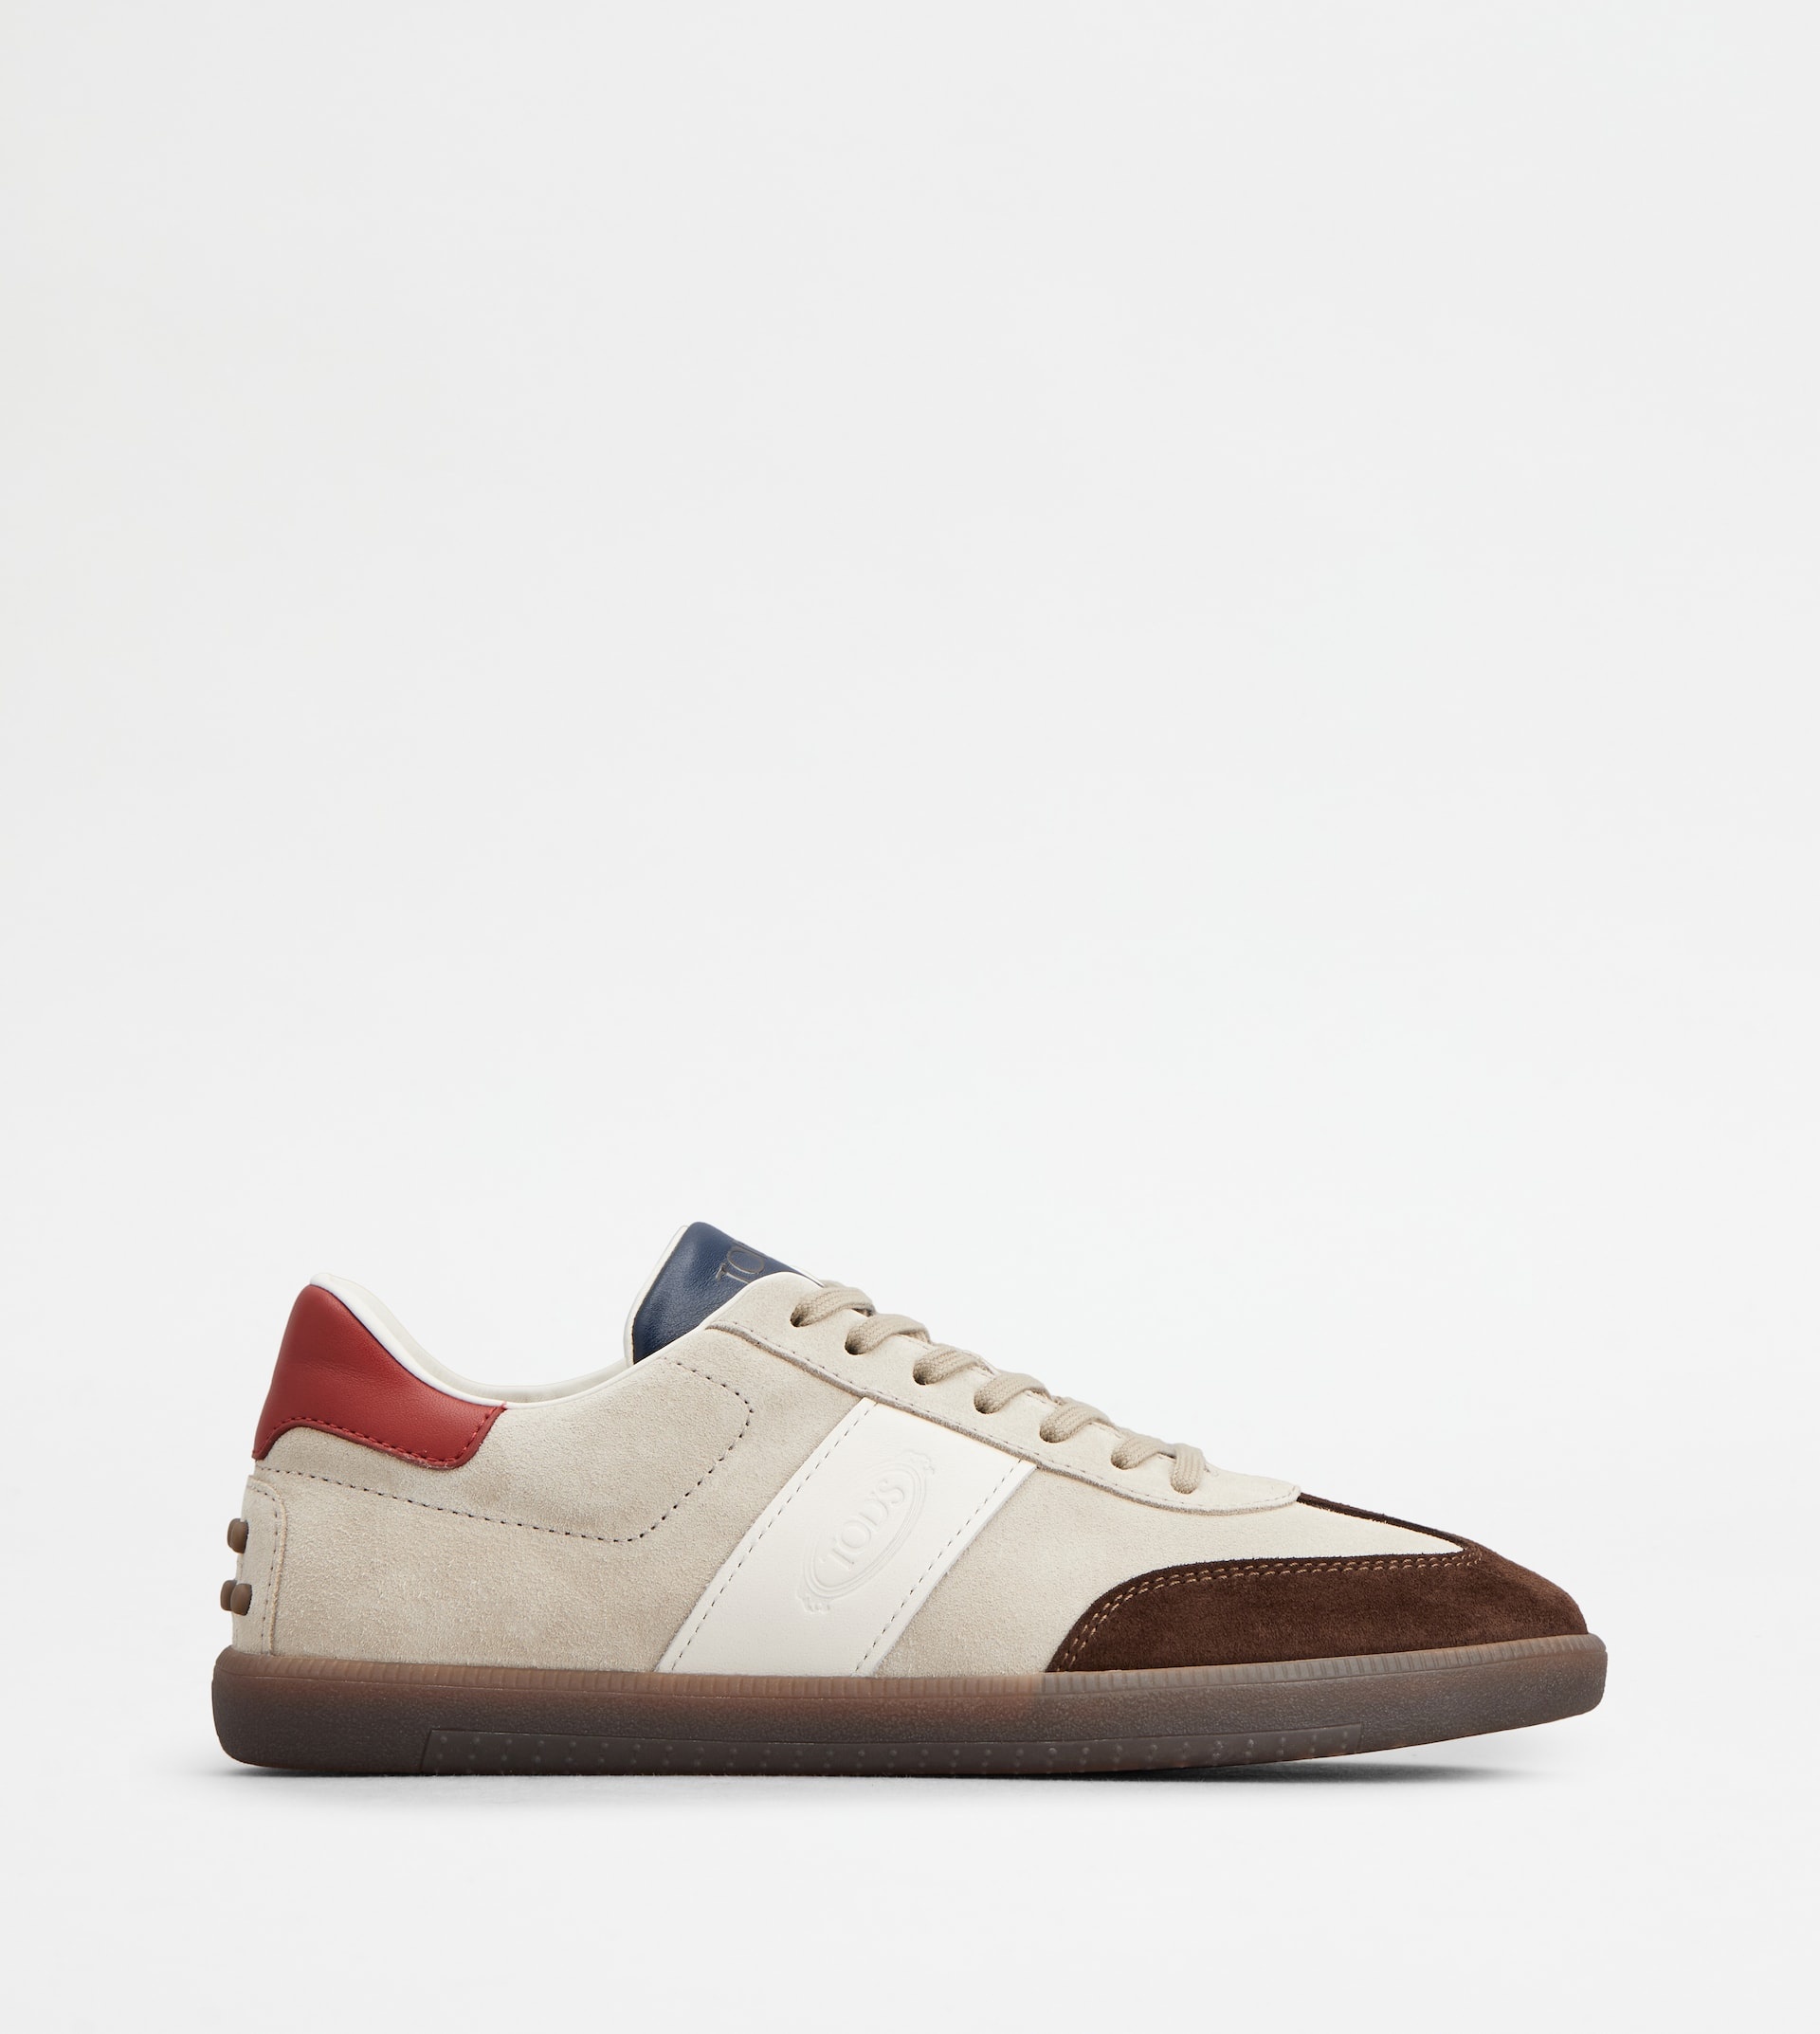 TOD'S TABS SNEAKERS IN SUEDE - BEIGE, WHITE, BROWN, RED - 1